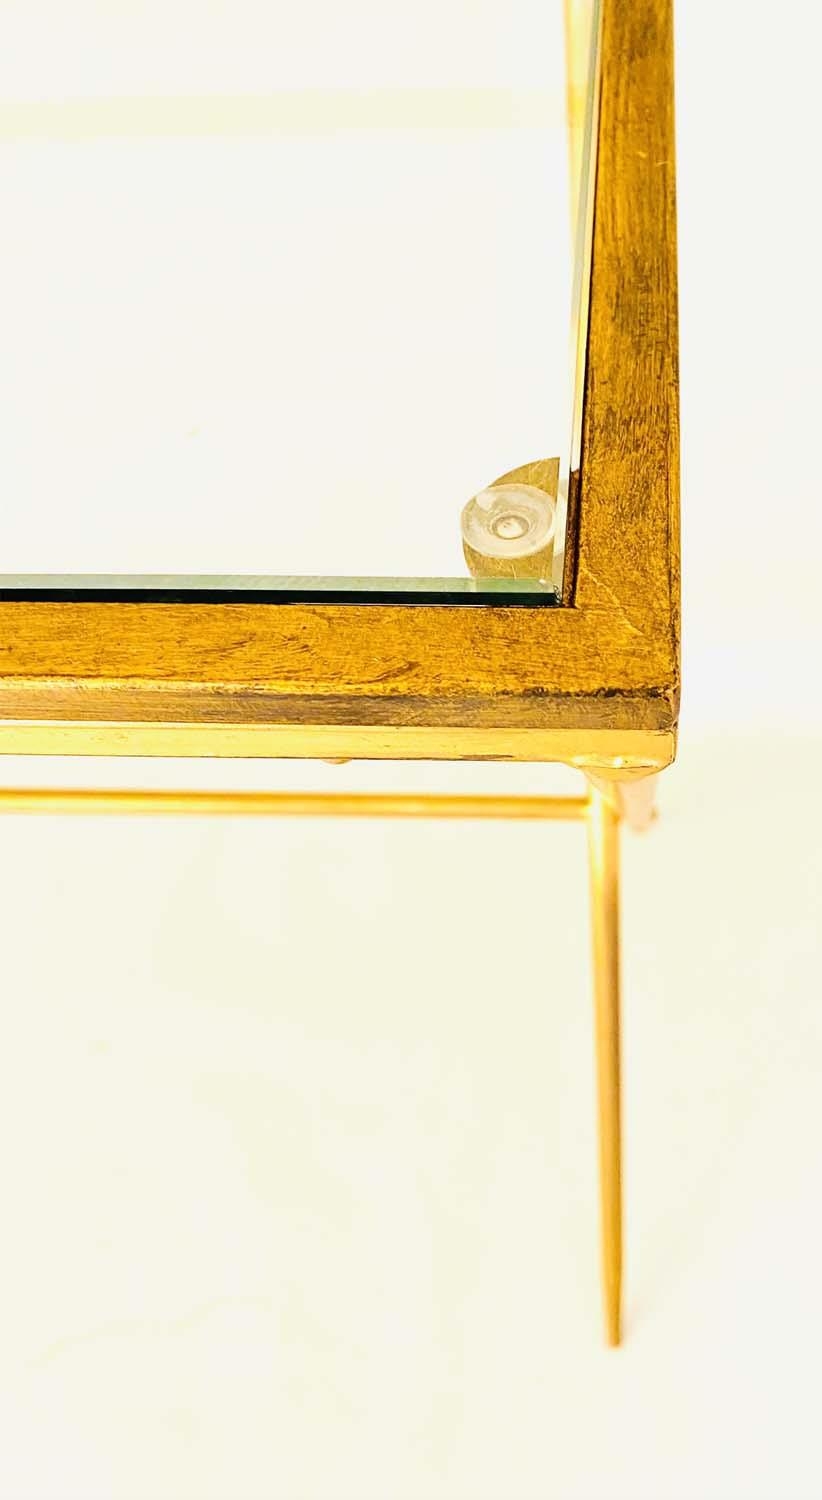 WRITING DESK, 1960s French style, gilt metal and glass, 87cm x 95cm x 42cm. - Image 3 of 3